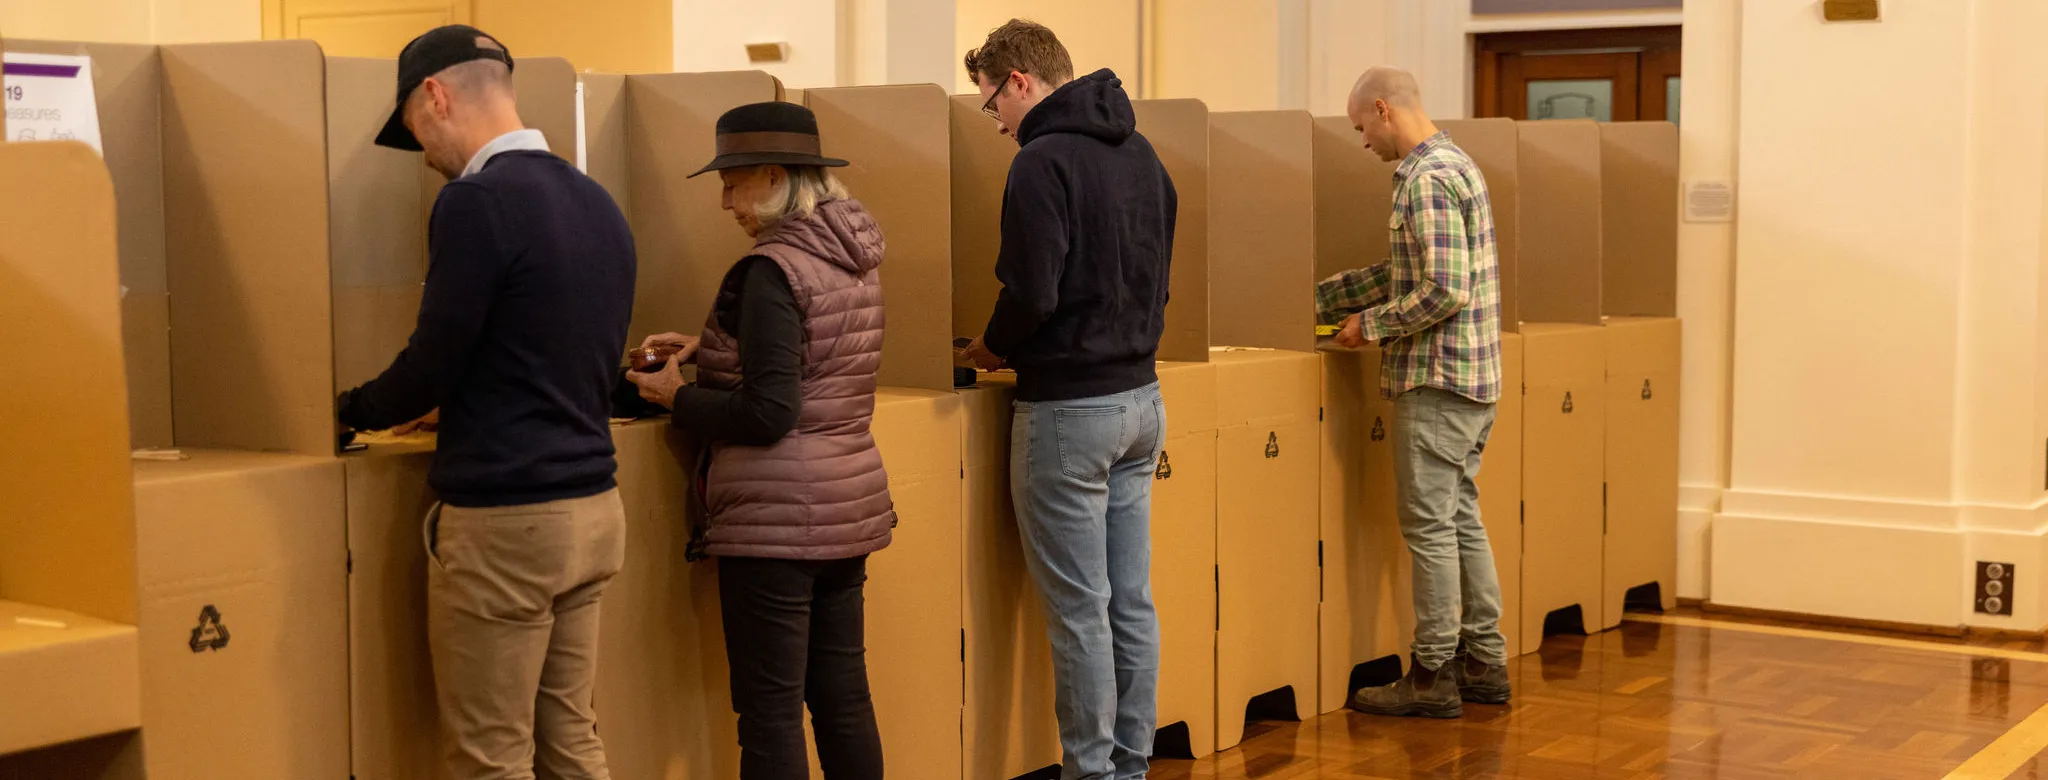 Four people, three men and a woman, standing at cardboard election booths in King's Hall.